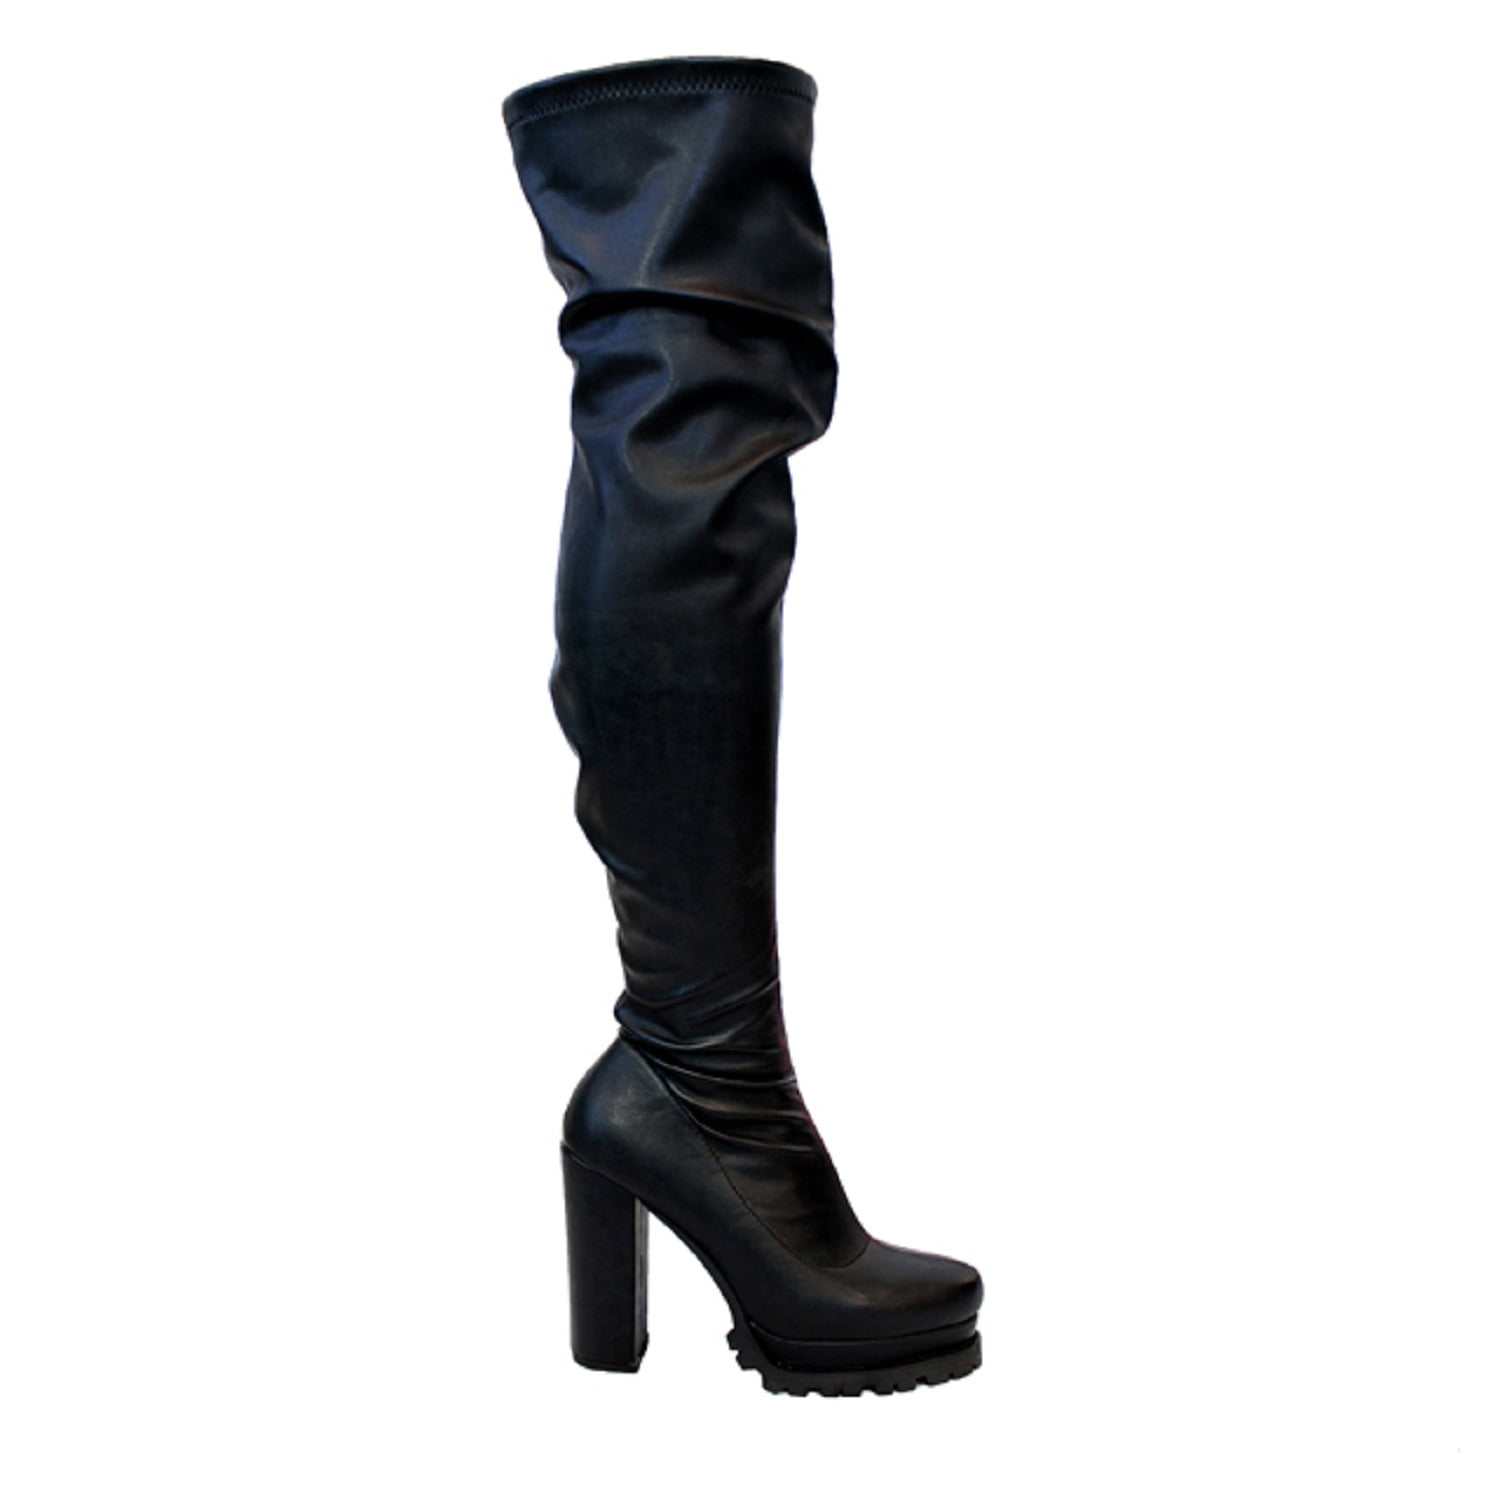 Womens Detachable Platform High Heels Shoes Over Knee High Thigh Slim Boots Size 